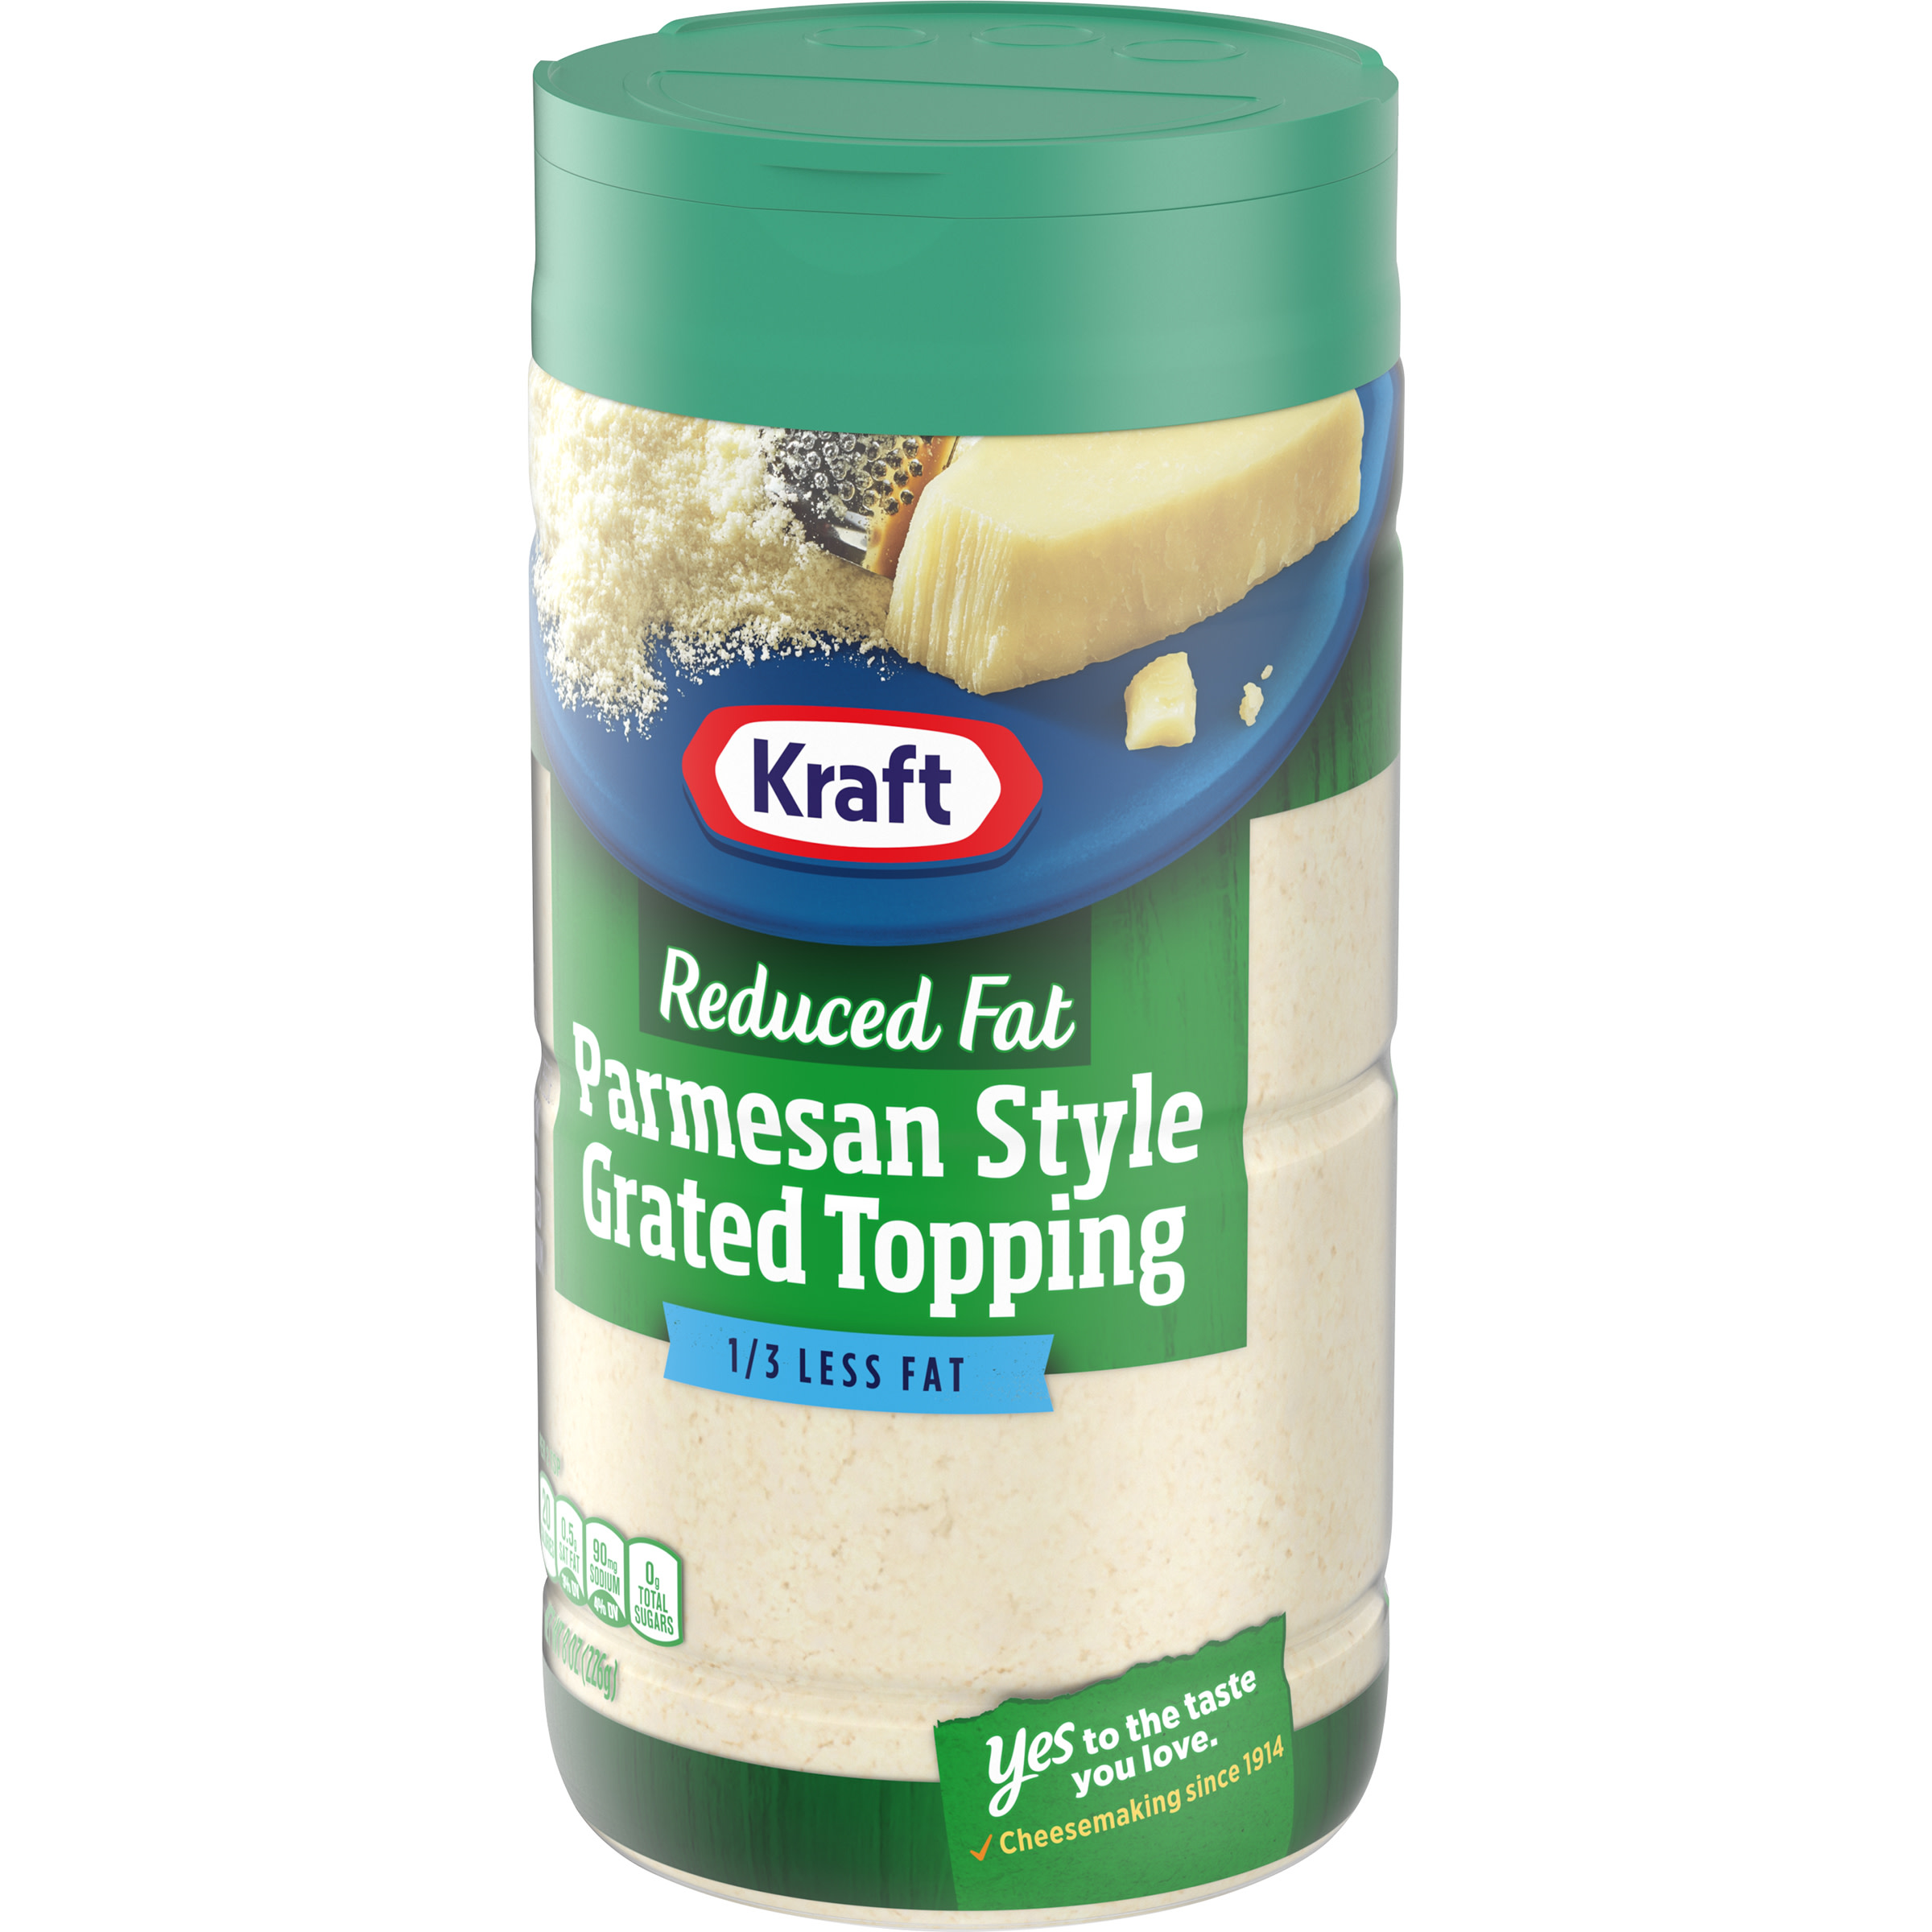 Kraft Parmesan Style Reduced Fat Grated Cheese Topping, 8 oz Shaker - image 4 of 8